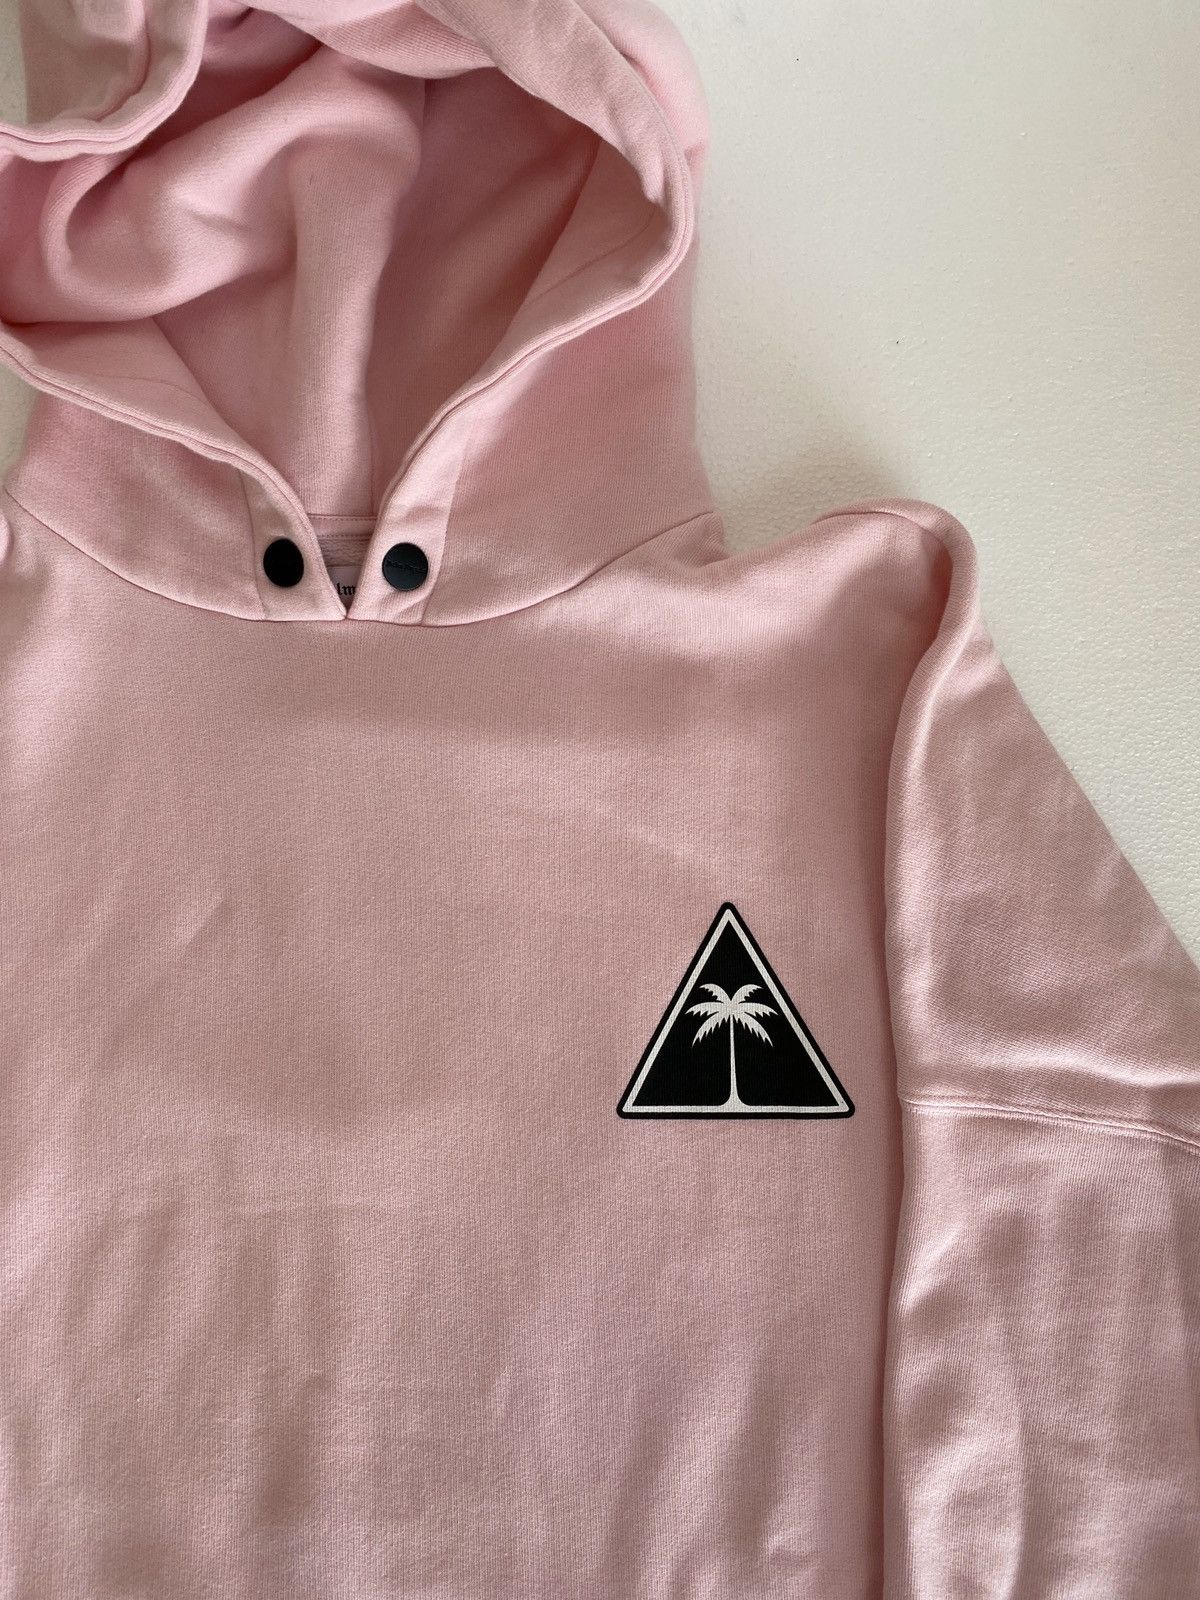 Palm Angels Palm Angels Pink Hoodie Size US M / EU 48-50 / 2 - 2 Preview